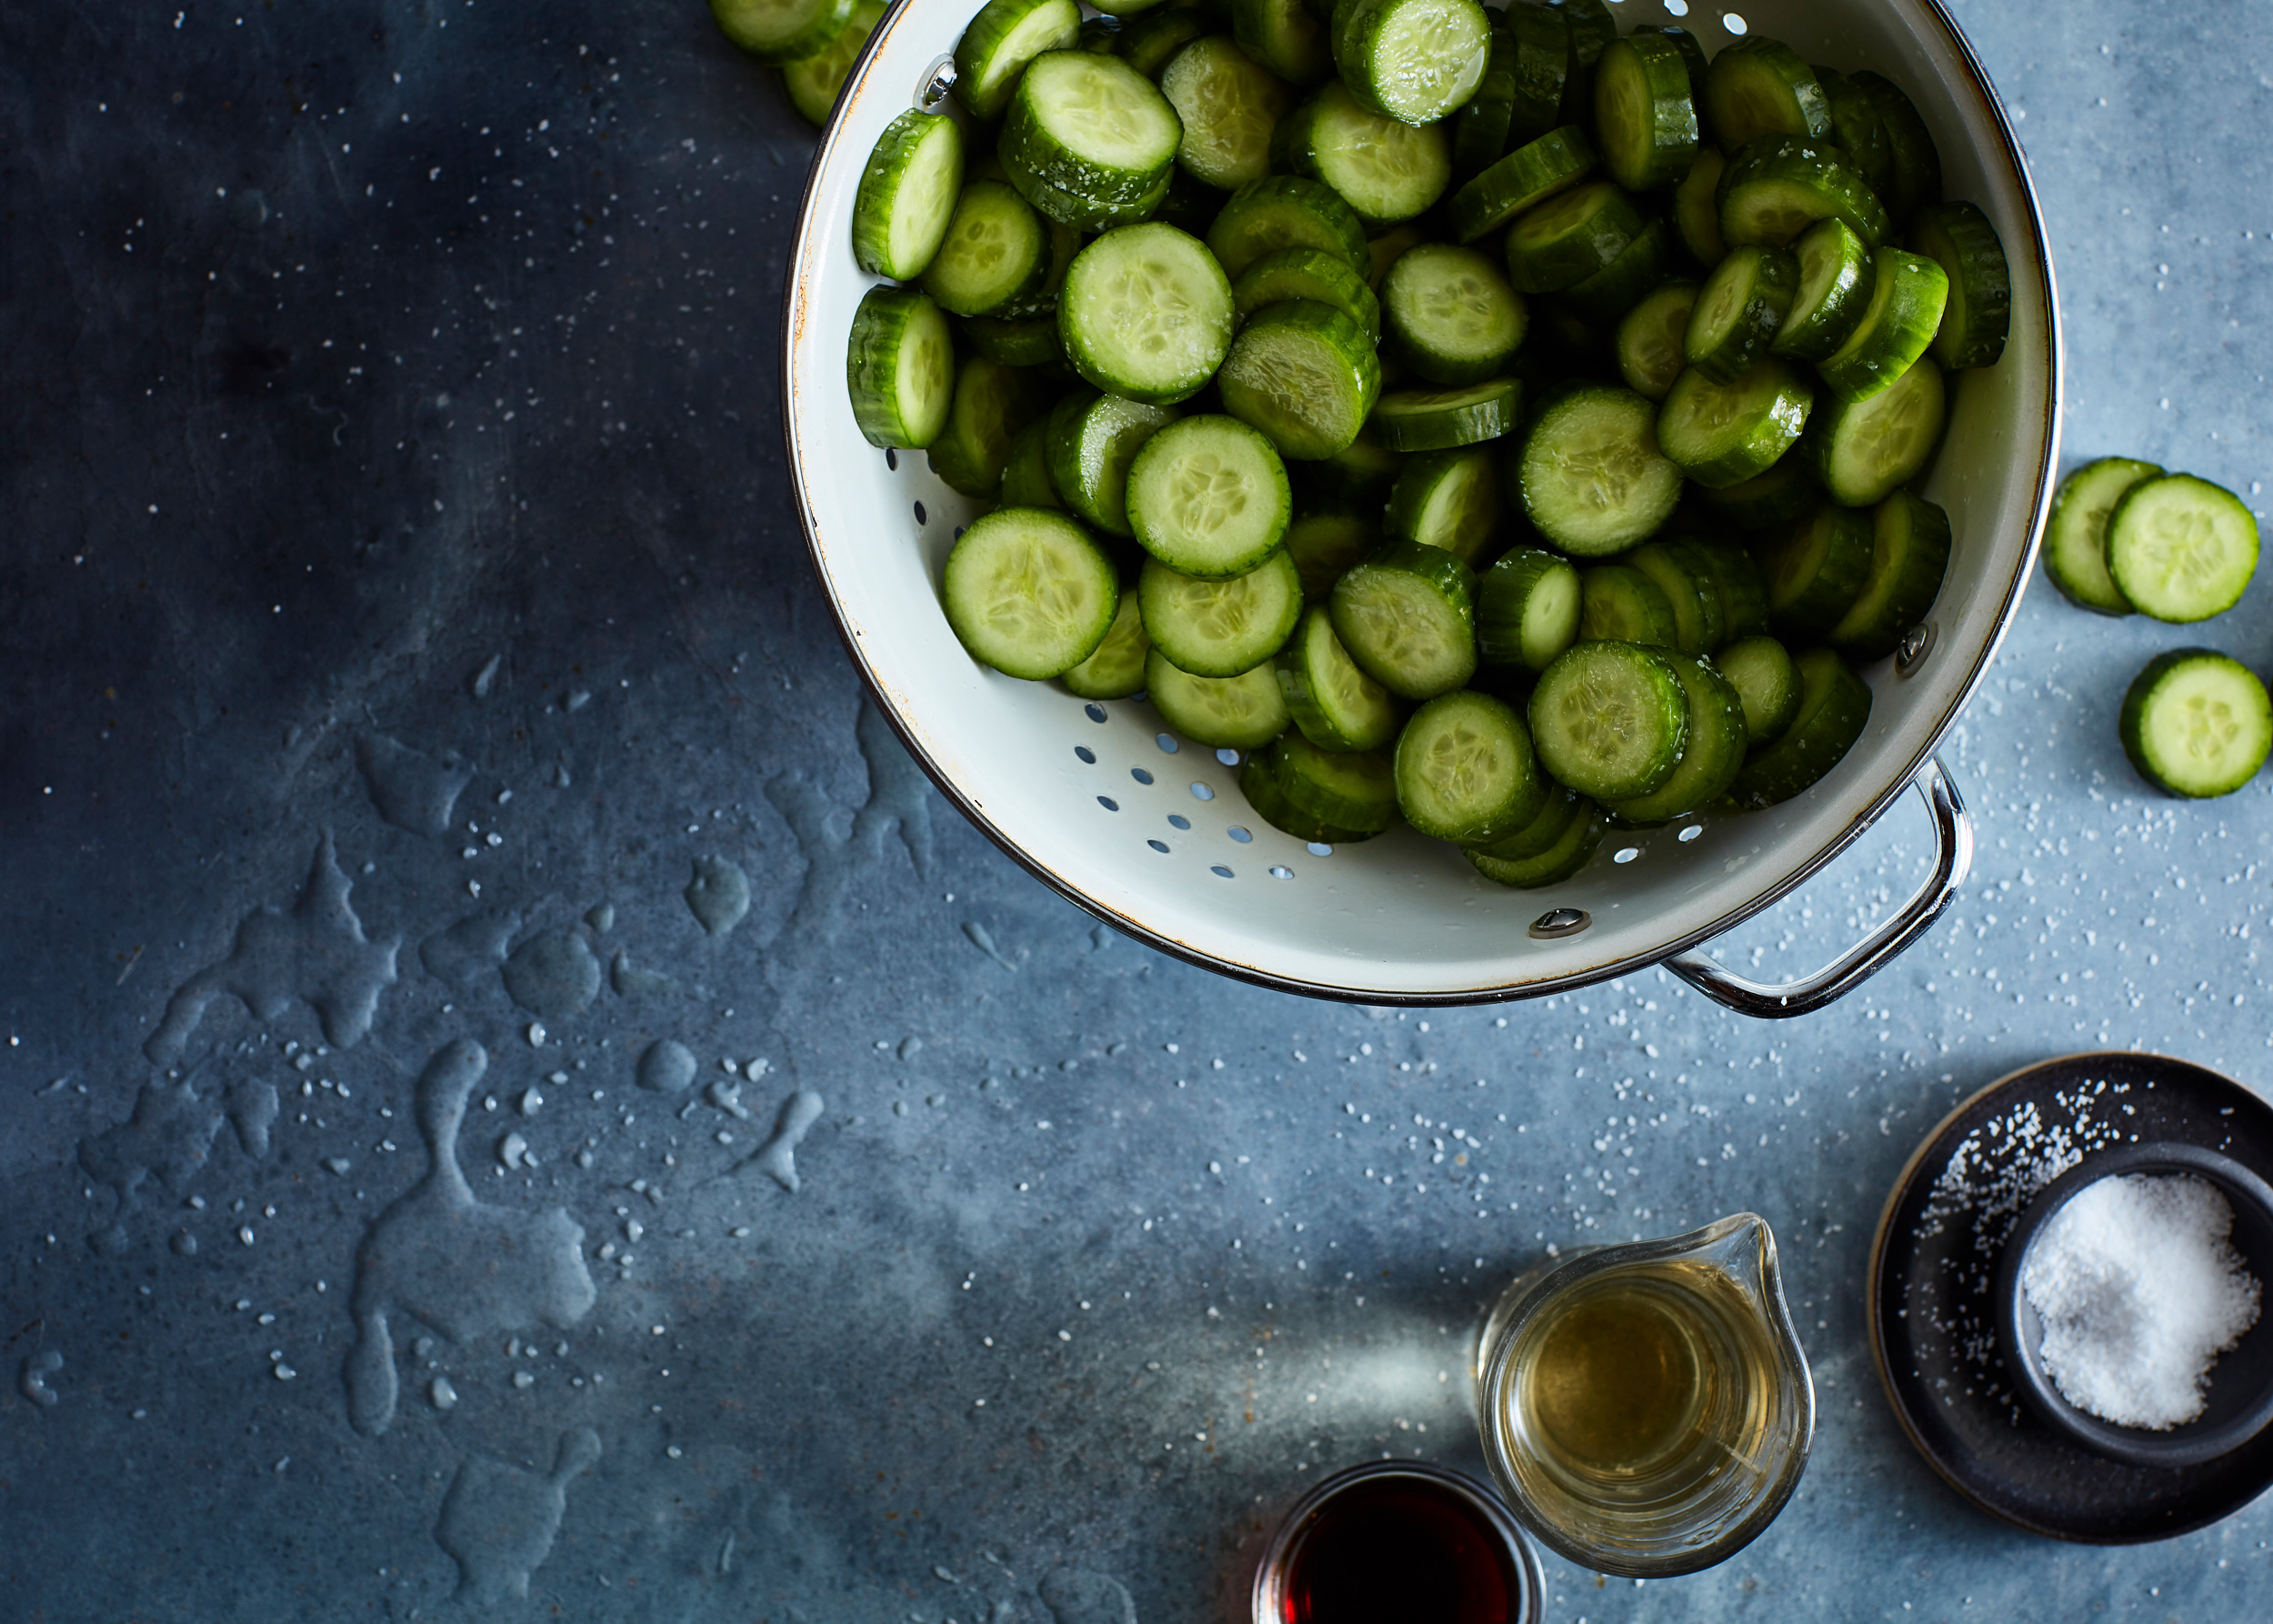 Prepping and jarring pickles on a wet surface with salt and vinegar. Moody, cool color temperature lighting.